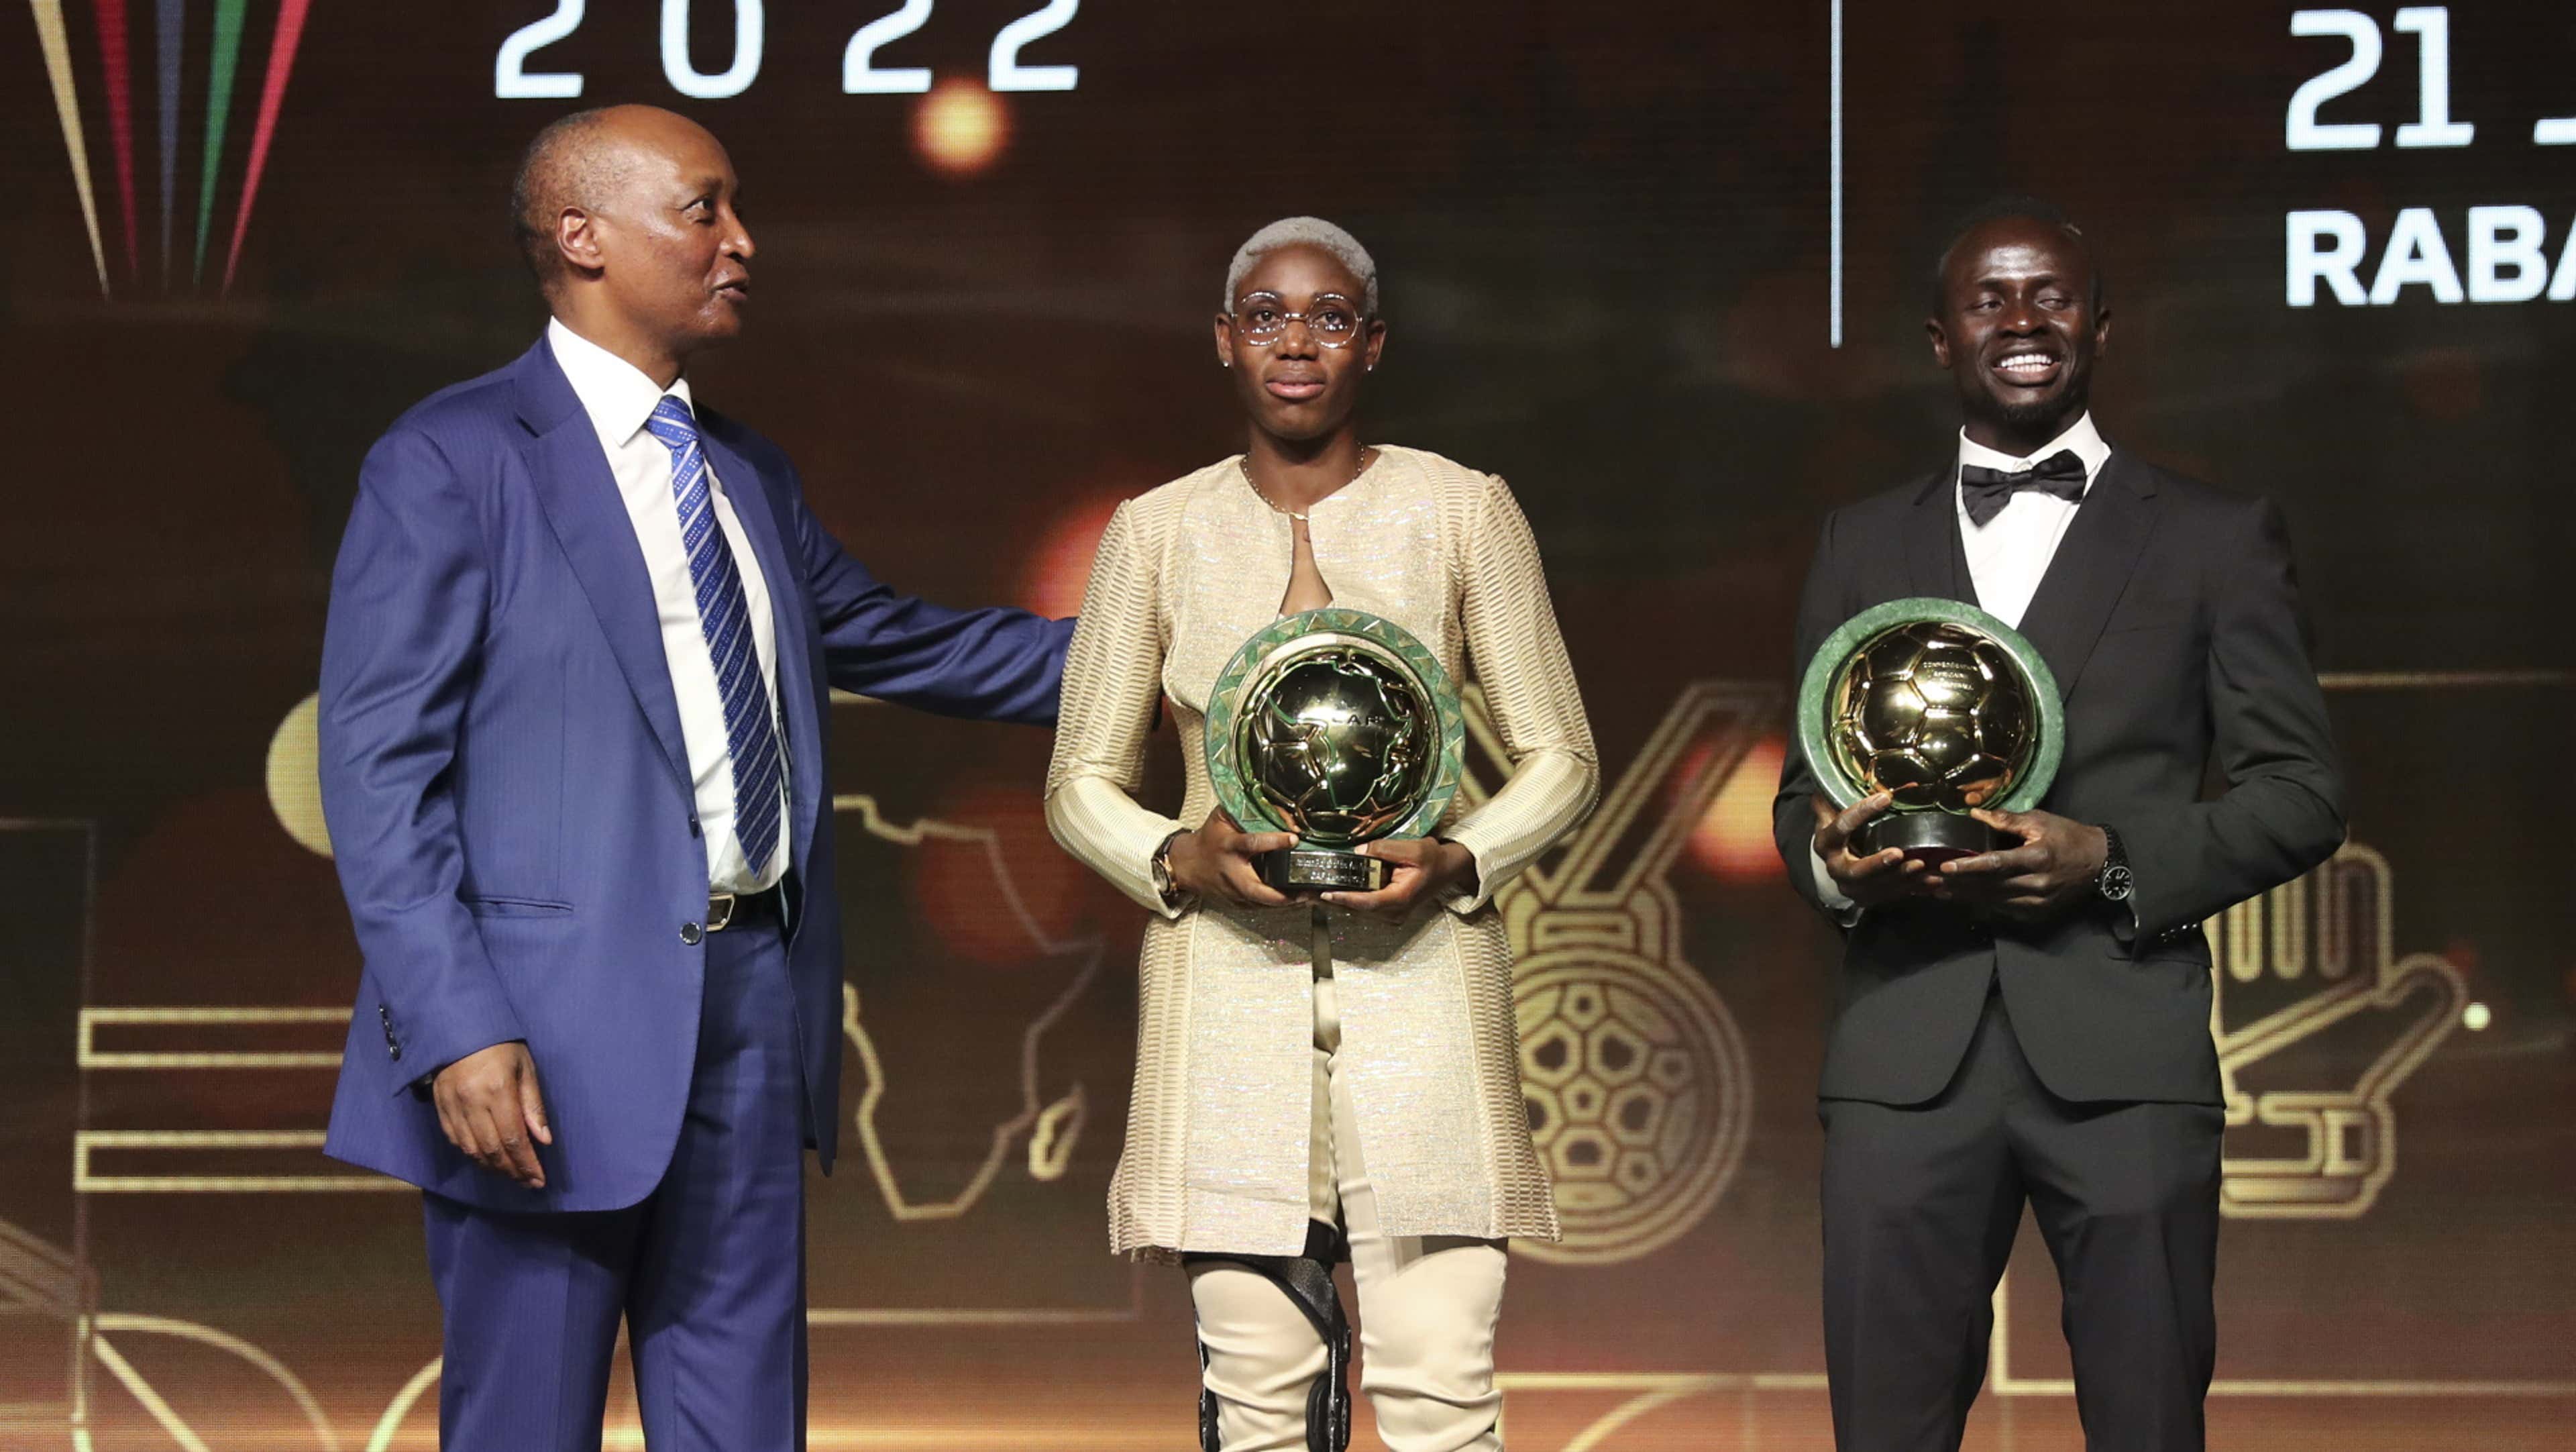 Osimhen wins African player of year ahead of key Champions League game.  Oshoala takes women's award